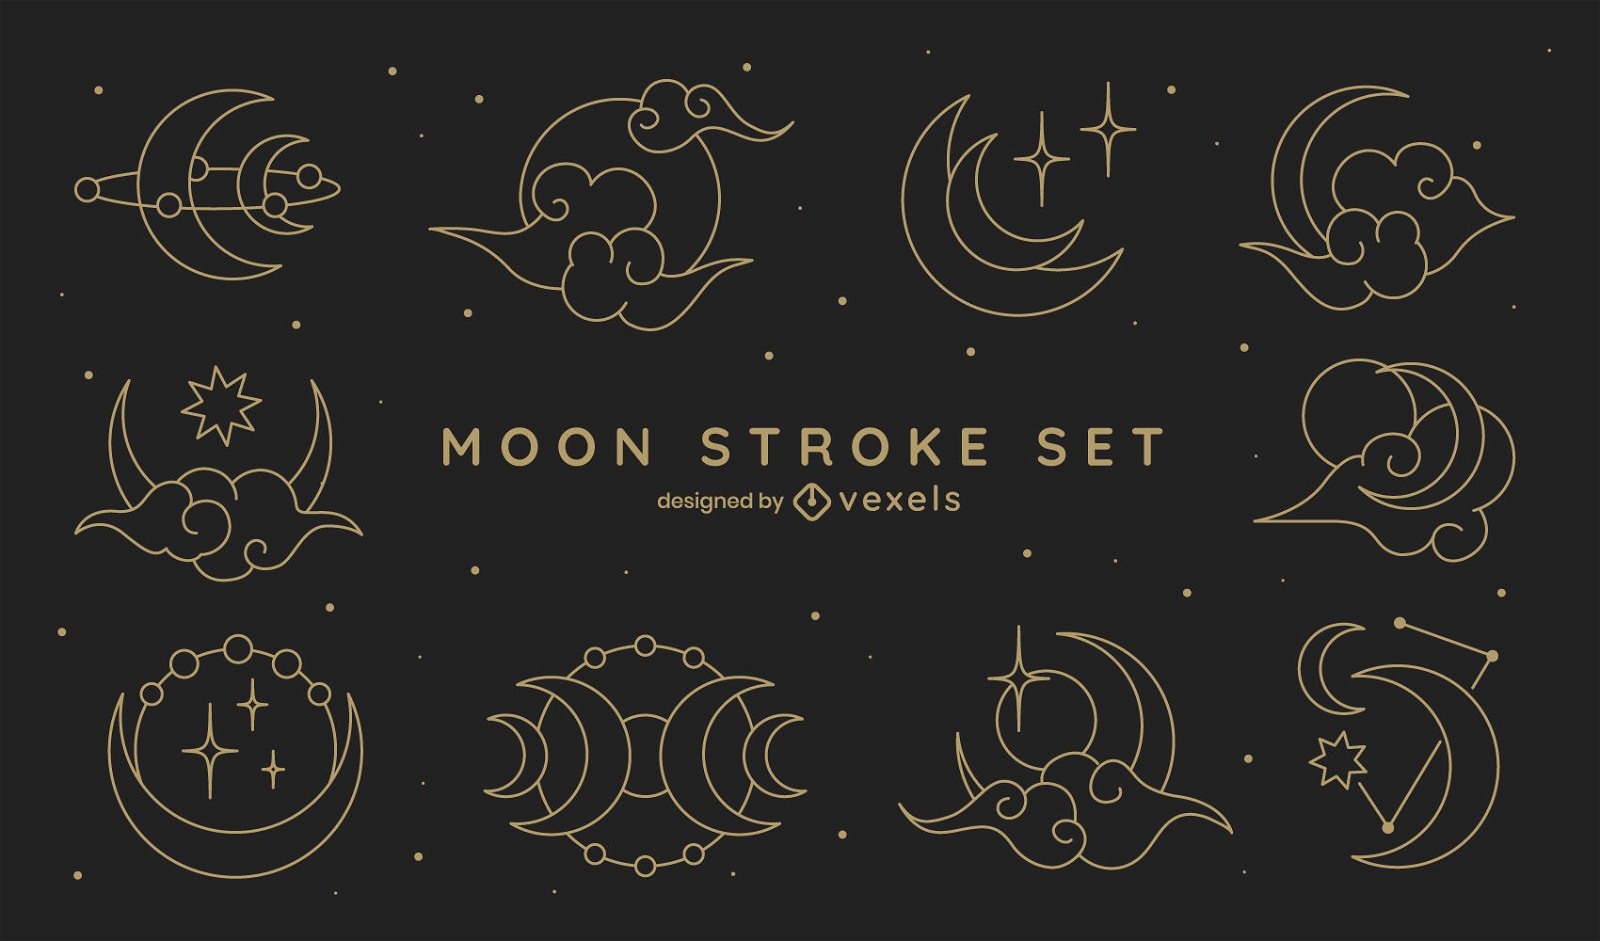 Mystical moon and clouds set design